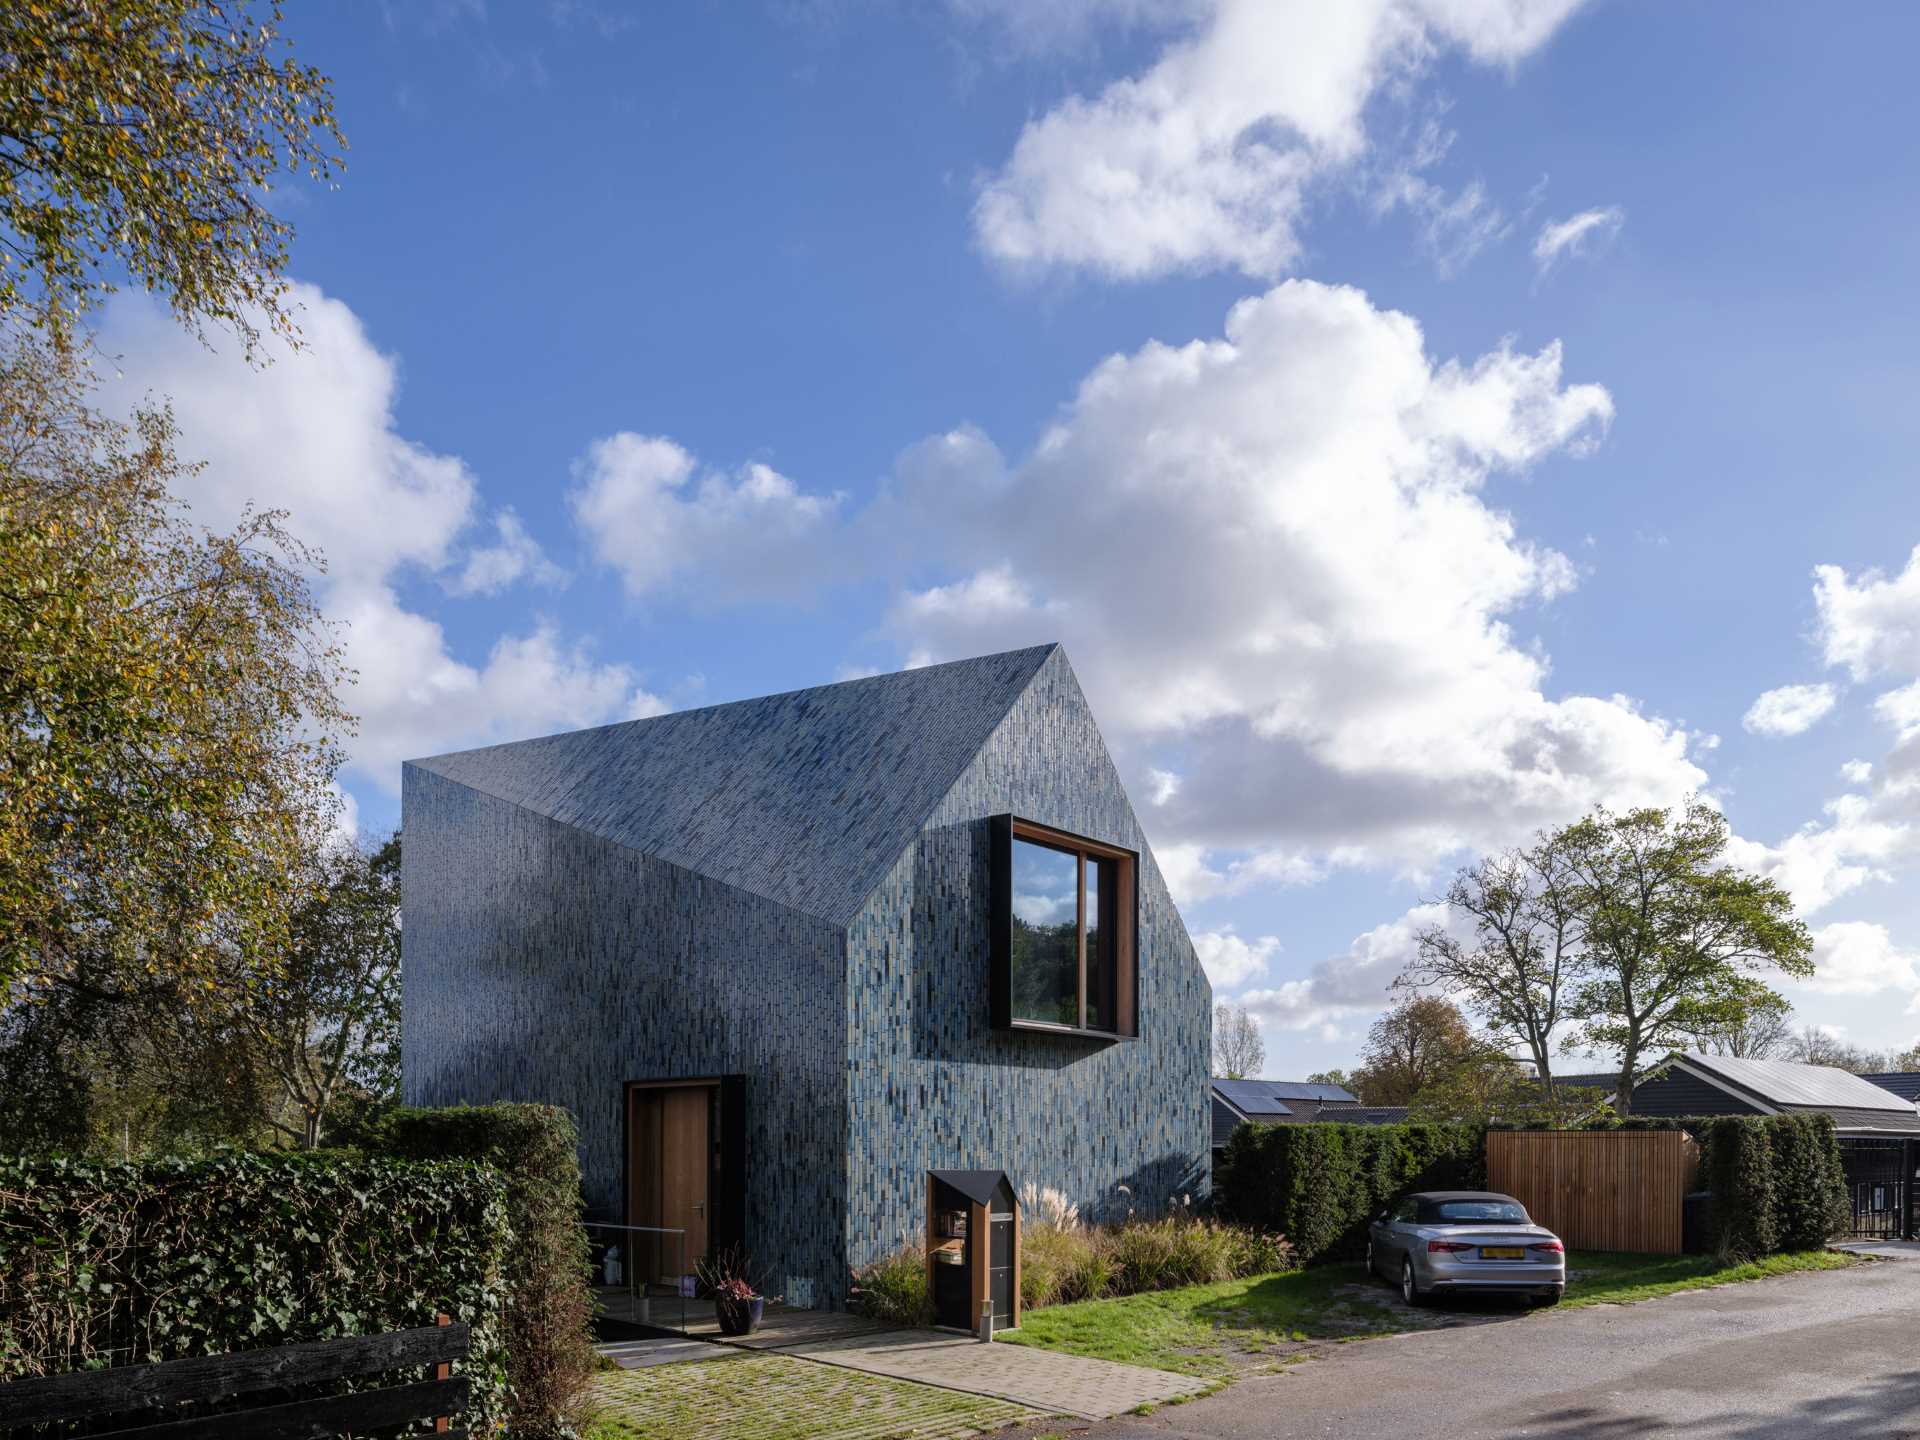 Blue Tiles Cover The Exterior Of This House With A Twisted Roof